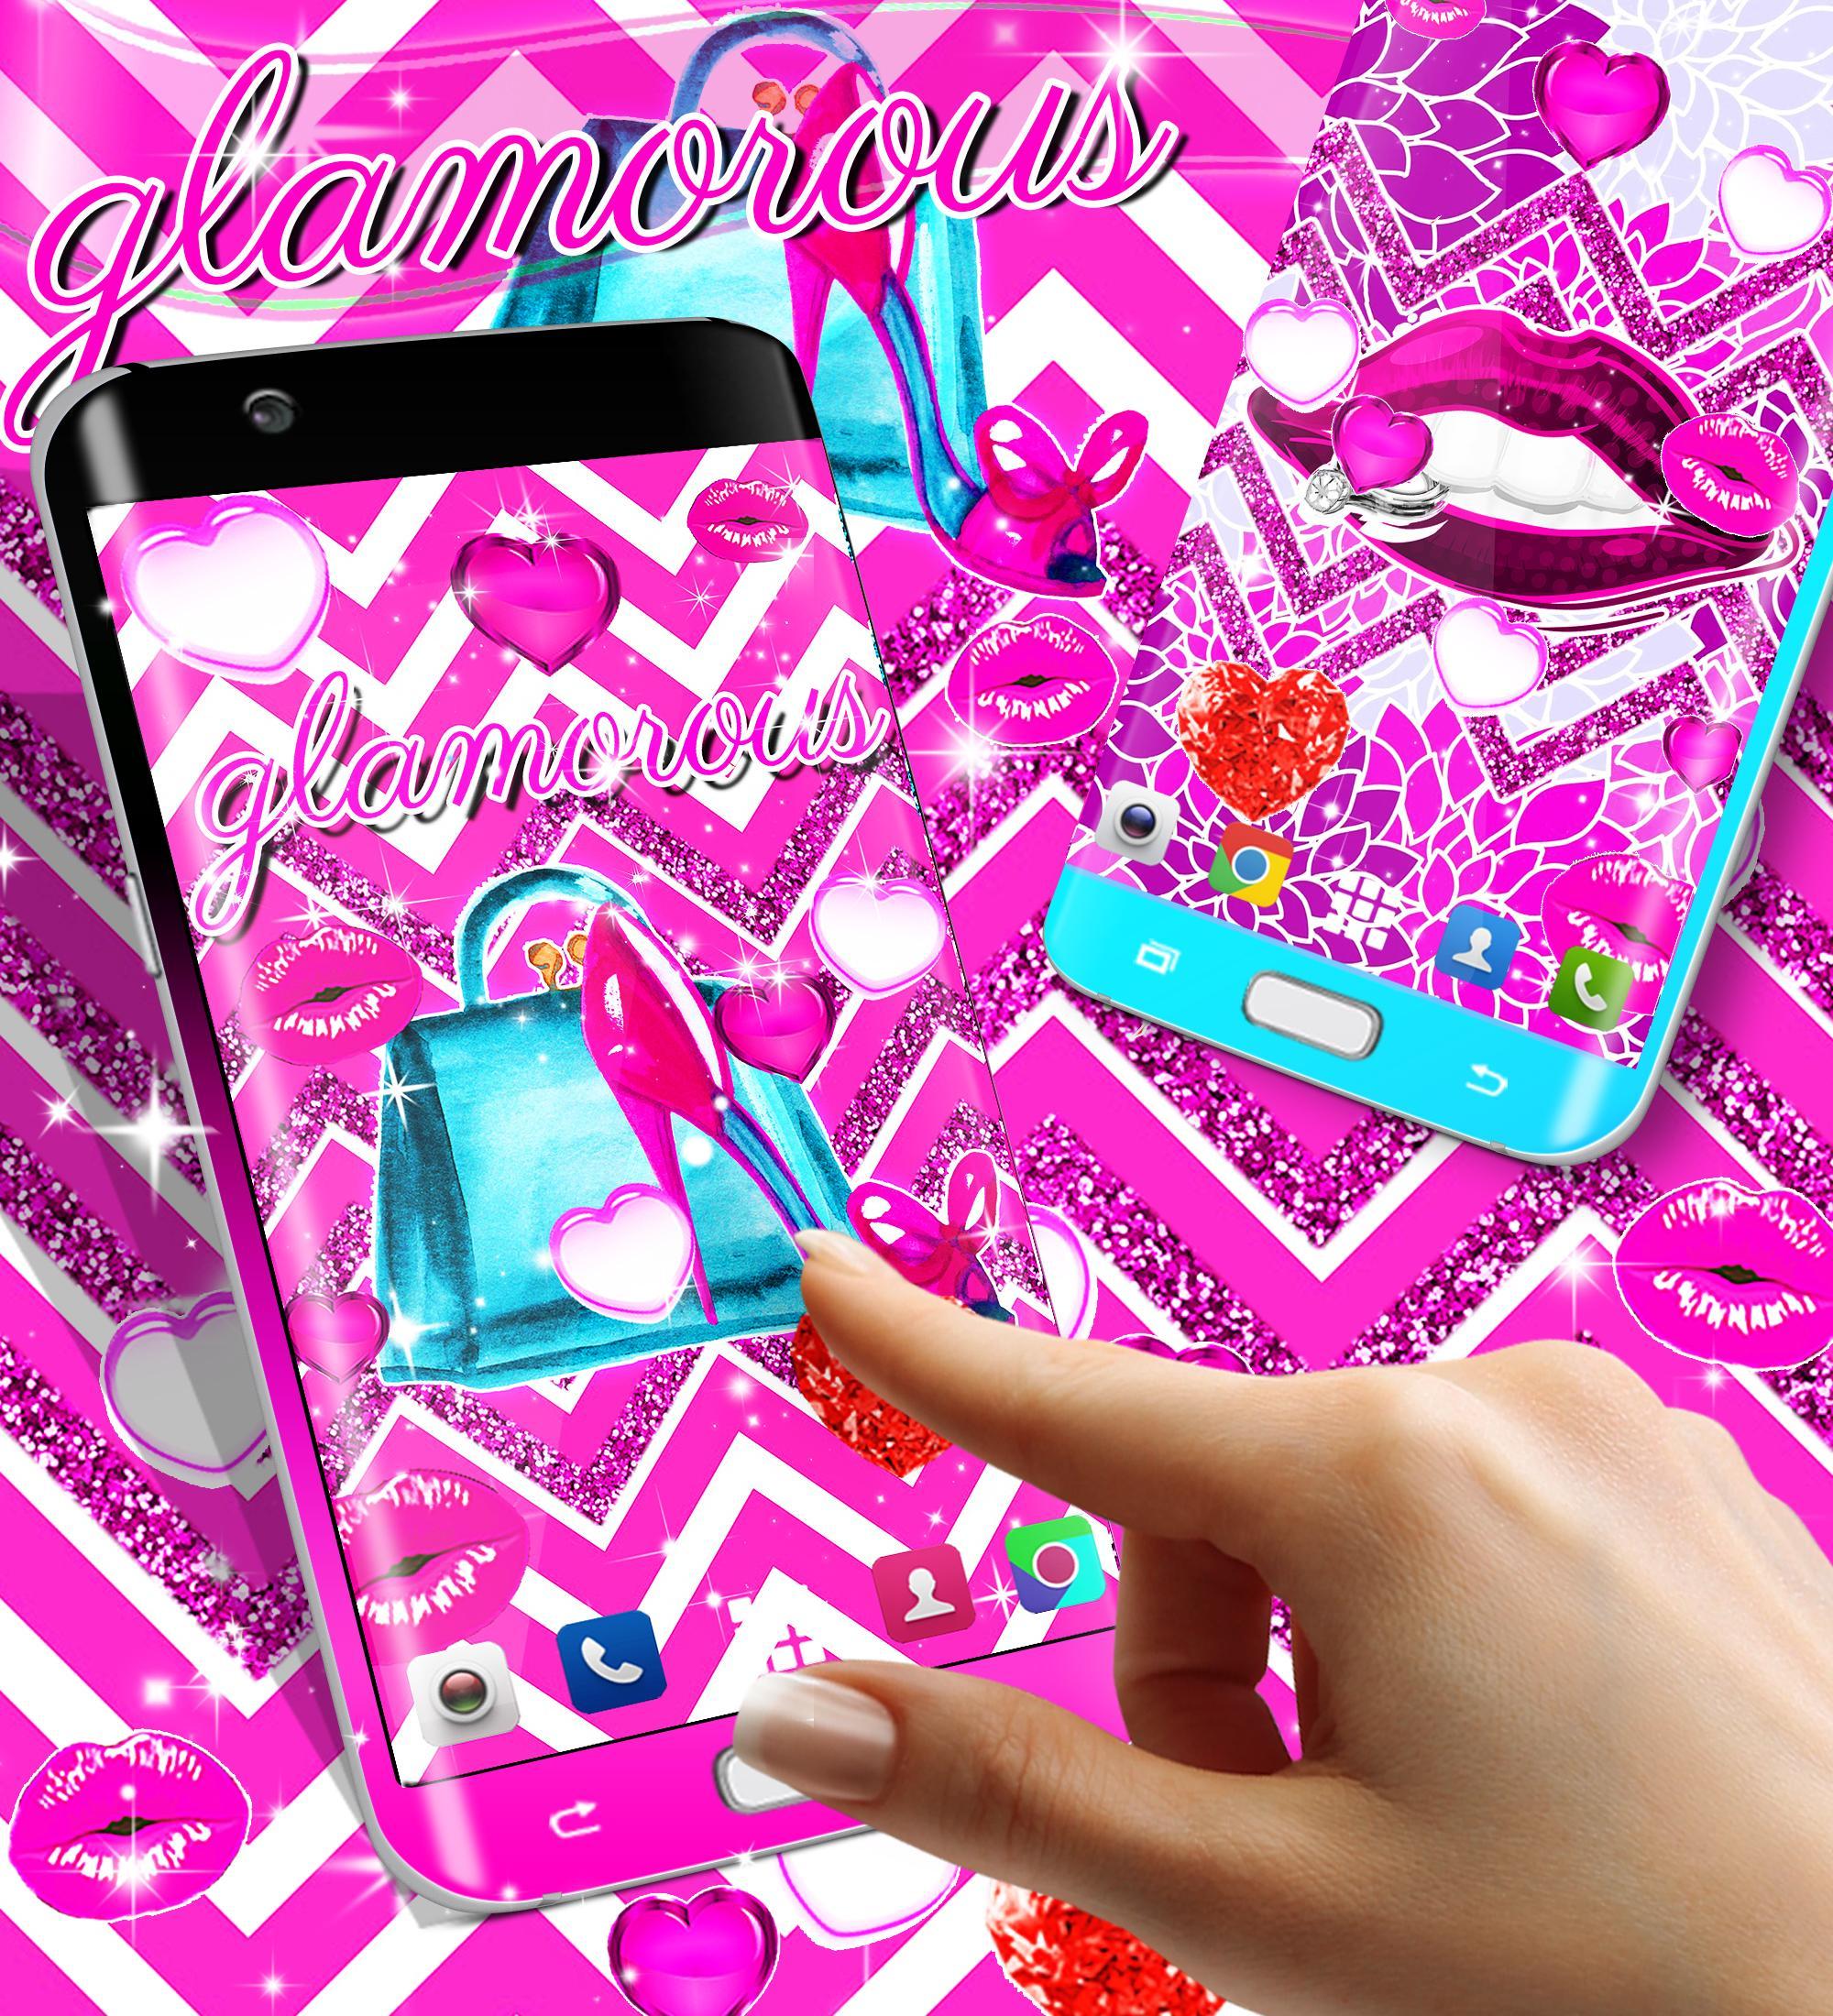 Glamorous Live Wallpaper For Android Apk